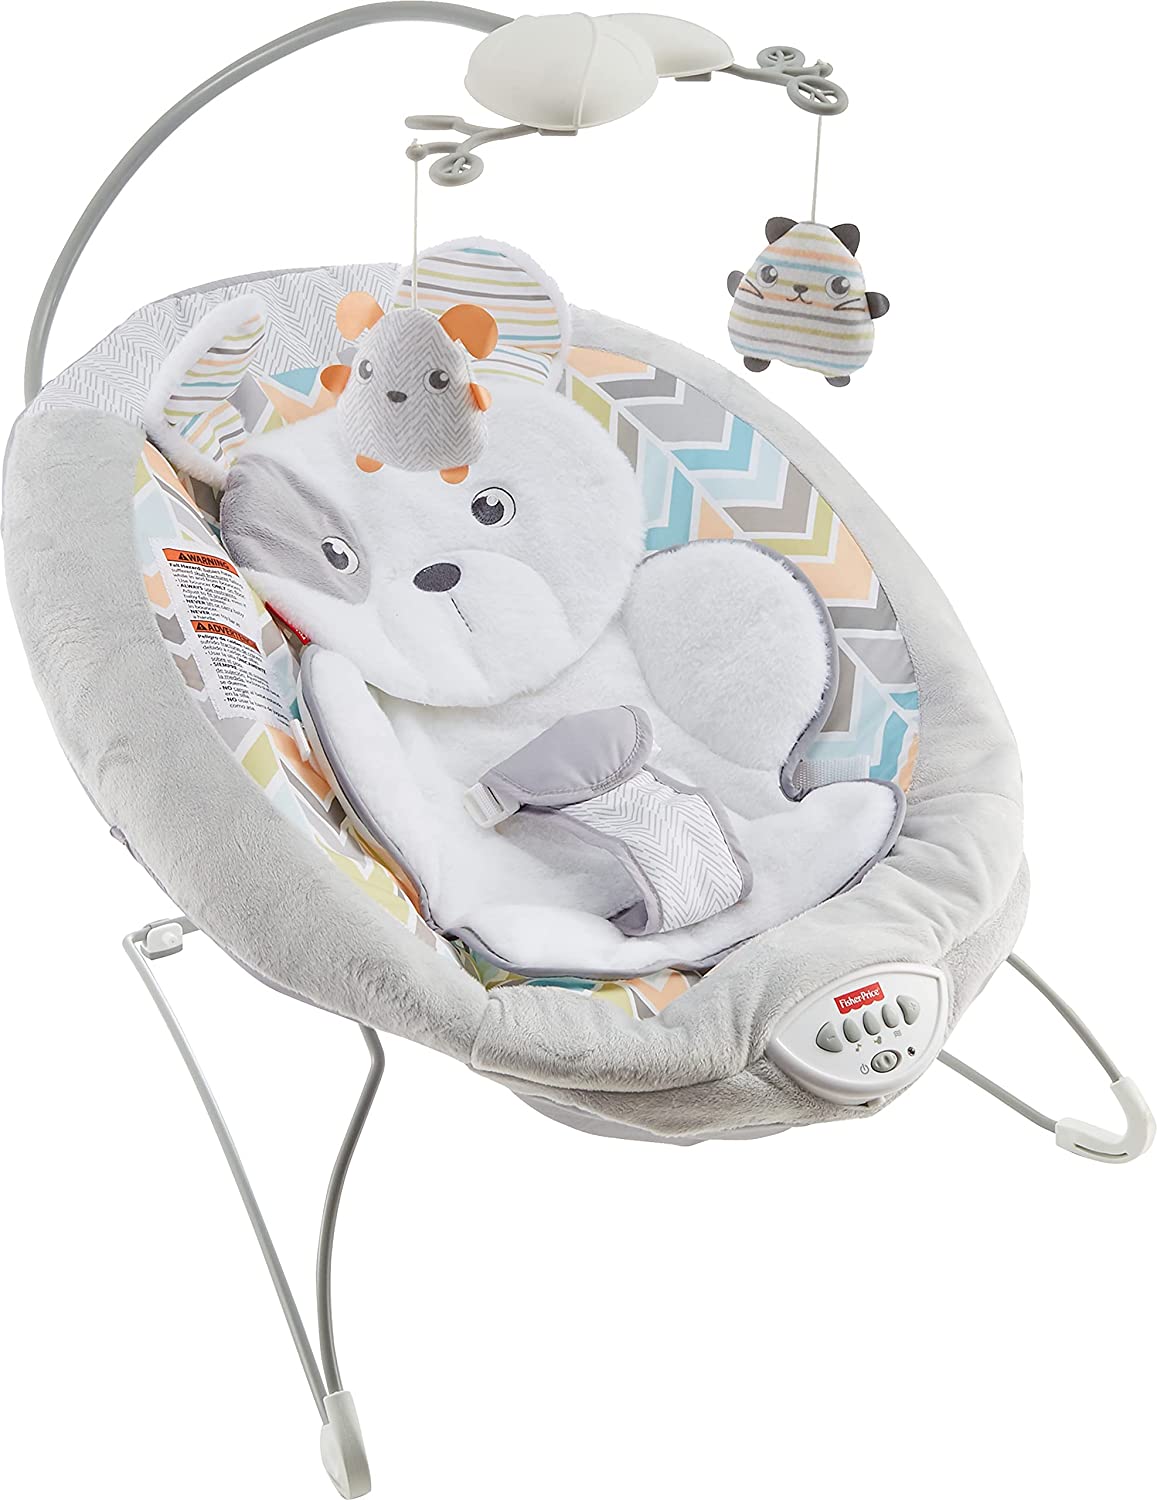 Fisher-Price Sweet Snugapuppy Deluxe Bouncer